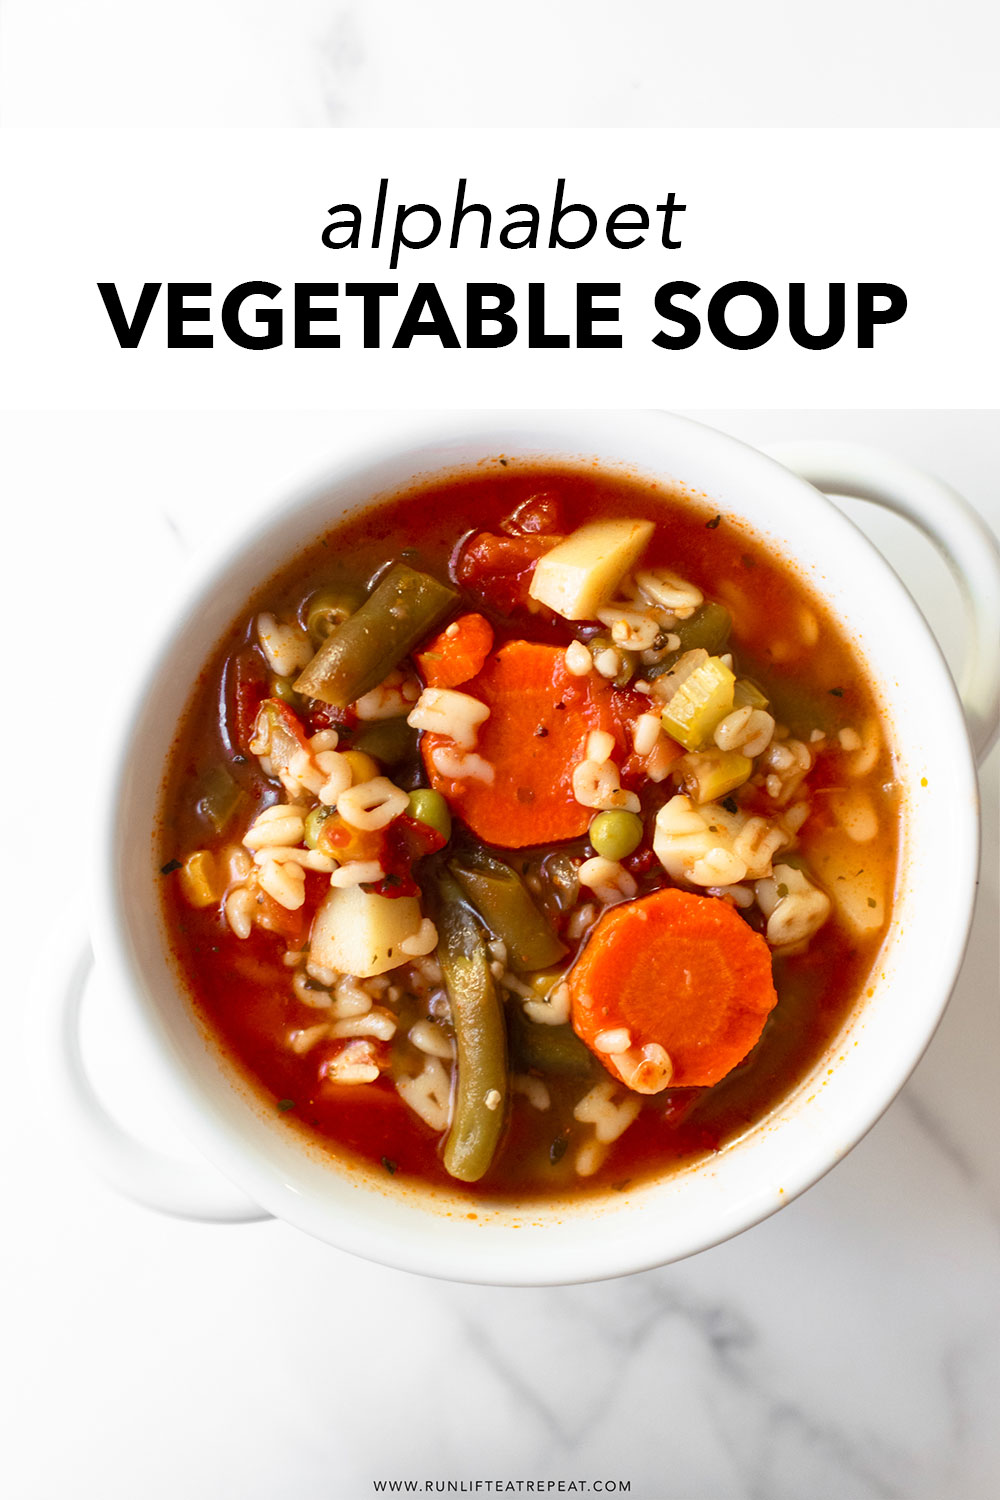 This homemade alphabet vegetable soup recipe is easy, satisfying, hearty, and flavorful. Not only is this soup made in one pot, it keeps perfectly for lunches all week. Use your favorite vegetables and small shaped pasta, like alphabet pasta.